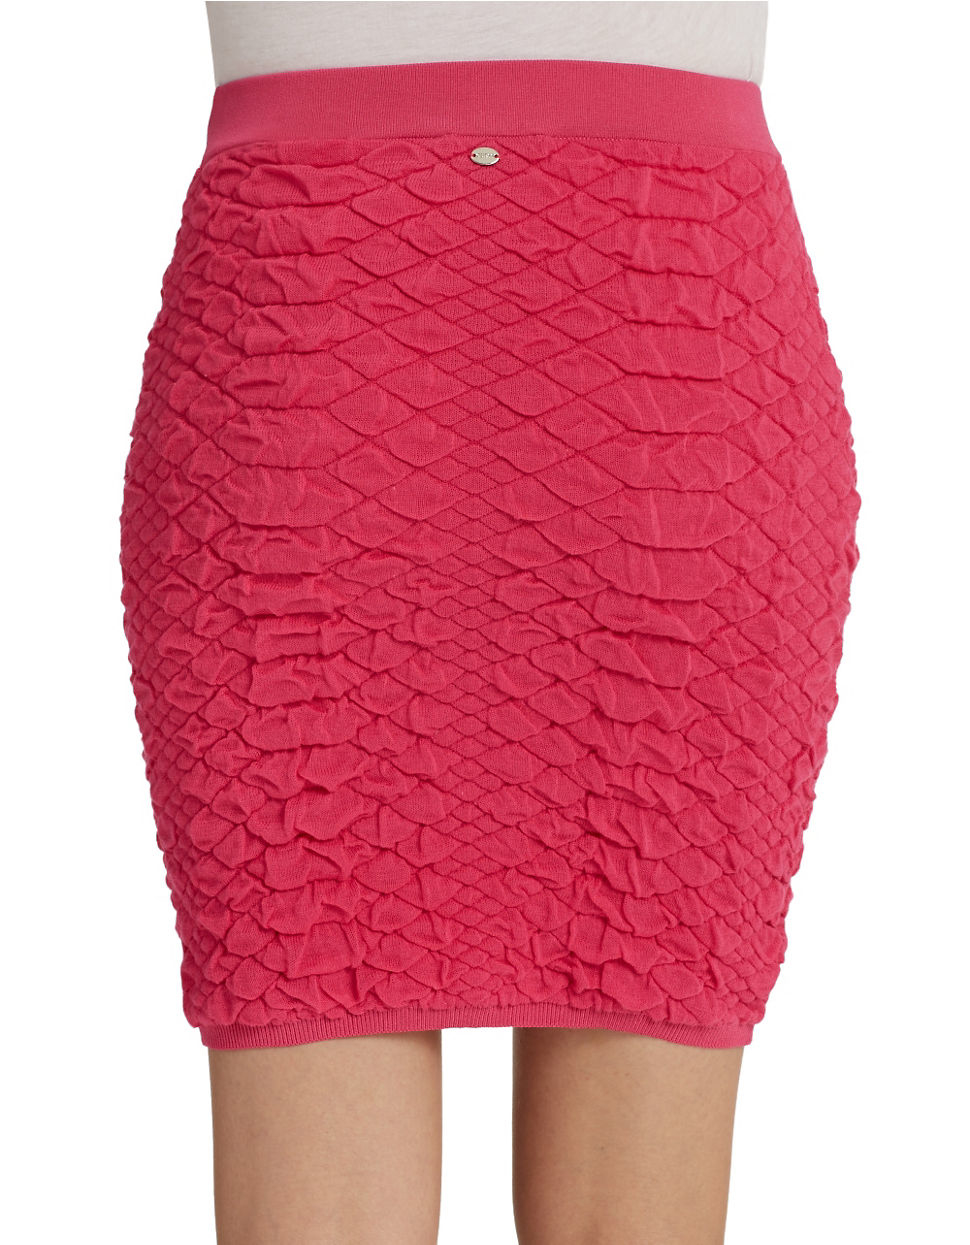 Guess Stretch Knit Skirt in Pink (Dark Pink) | Lyst